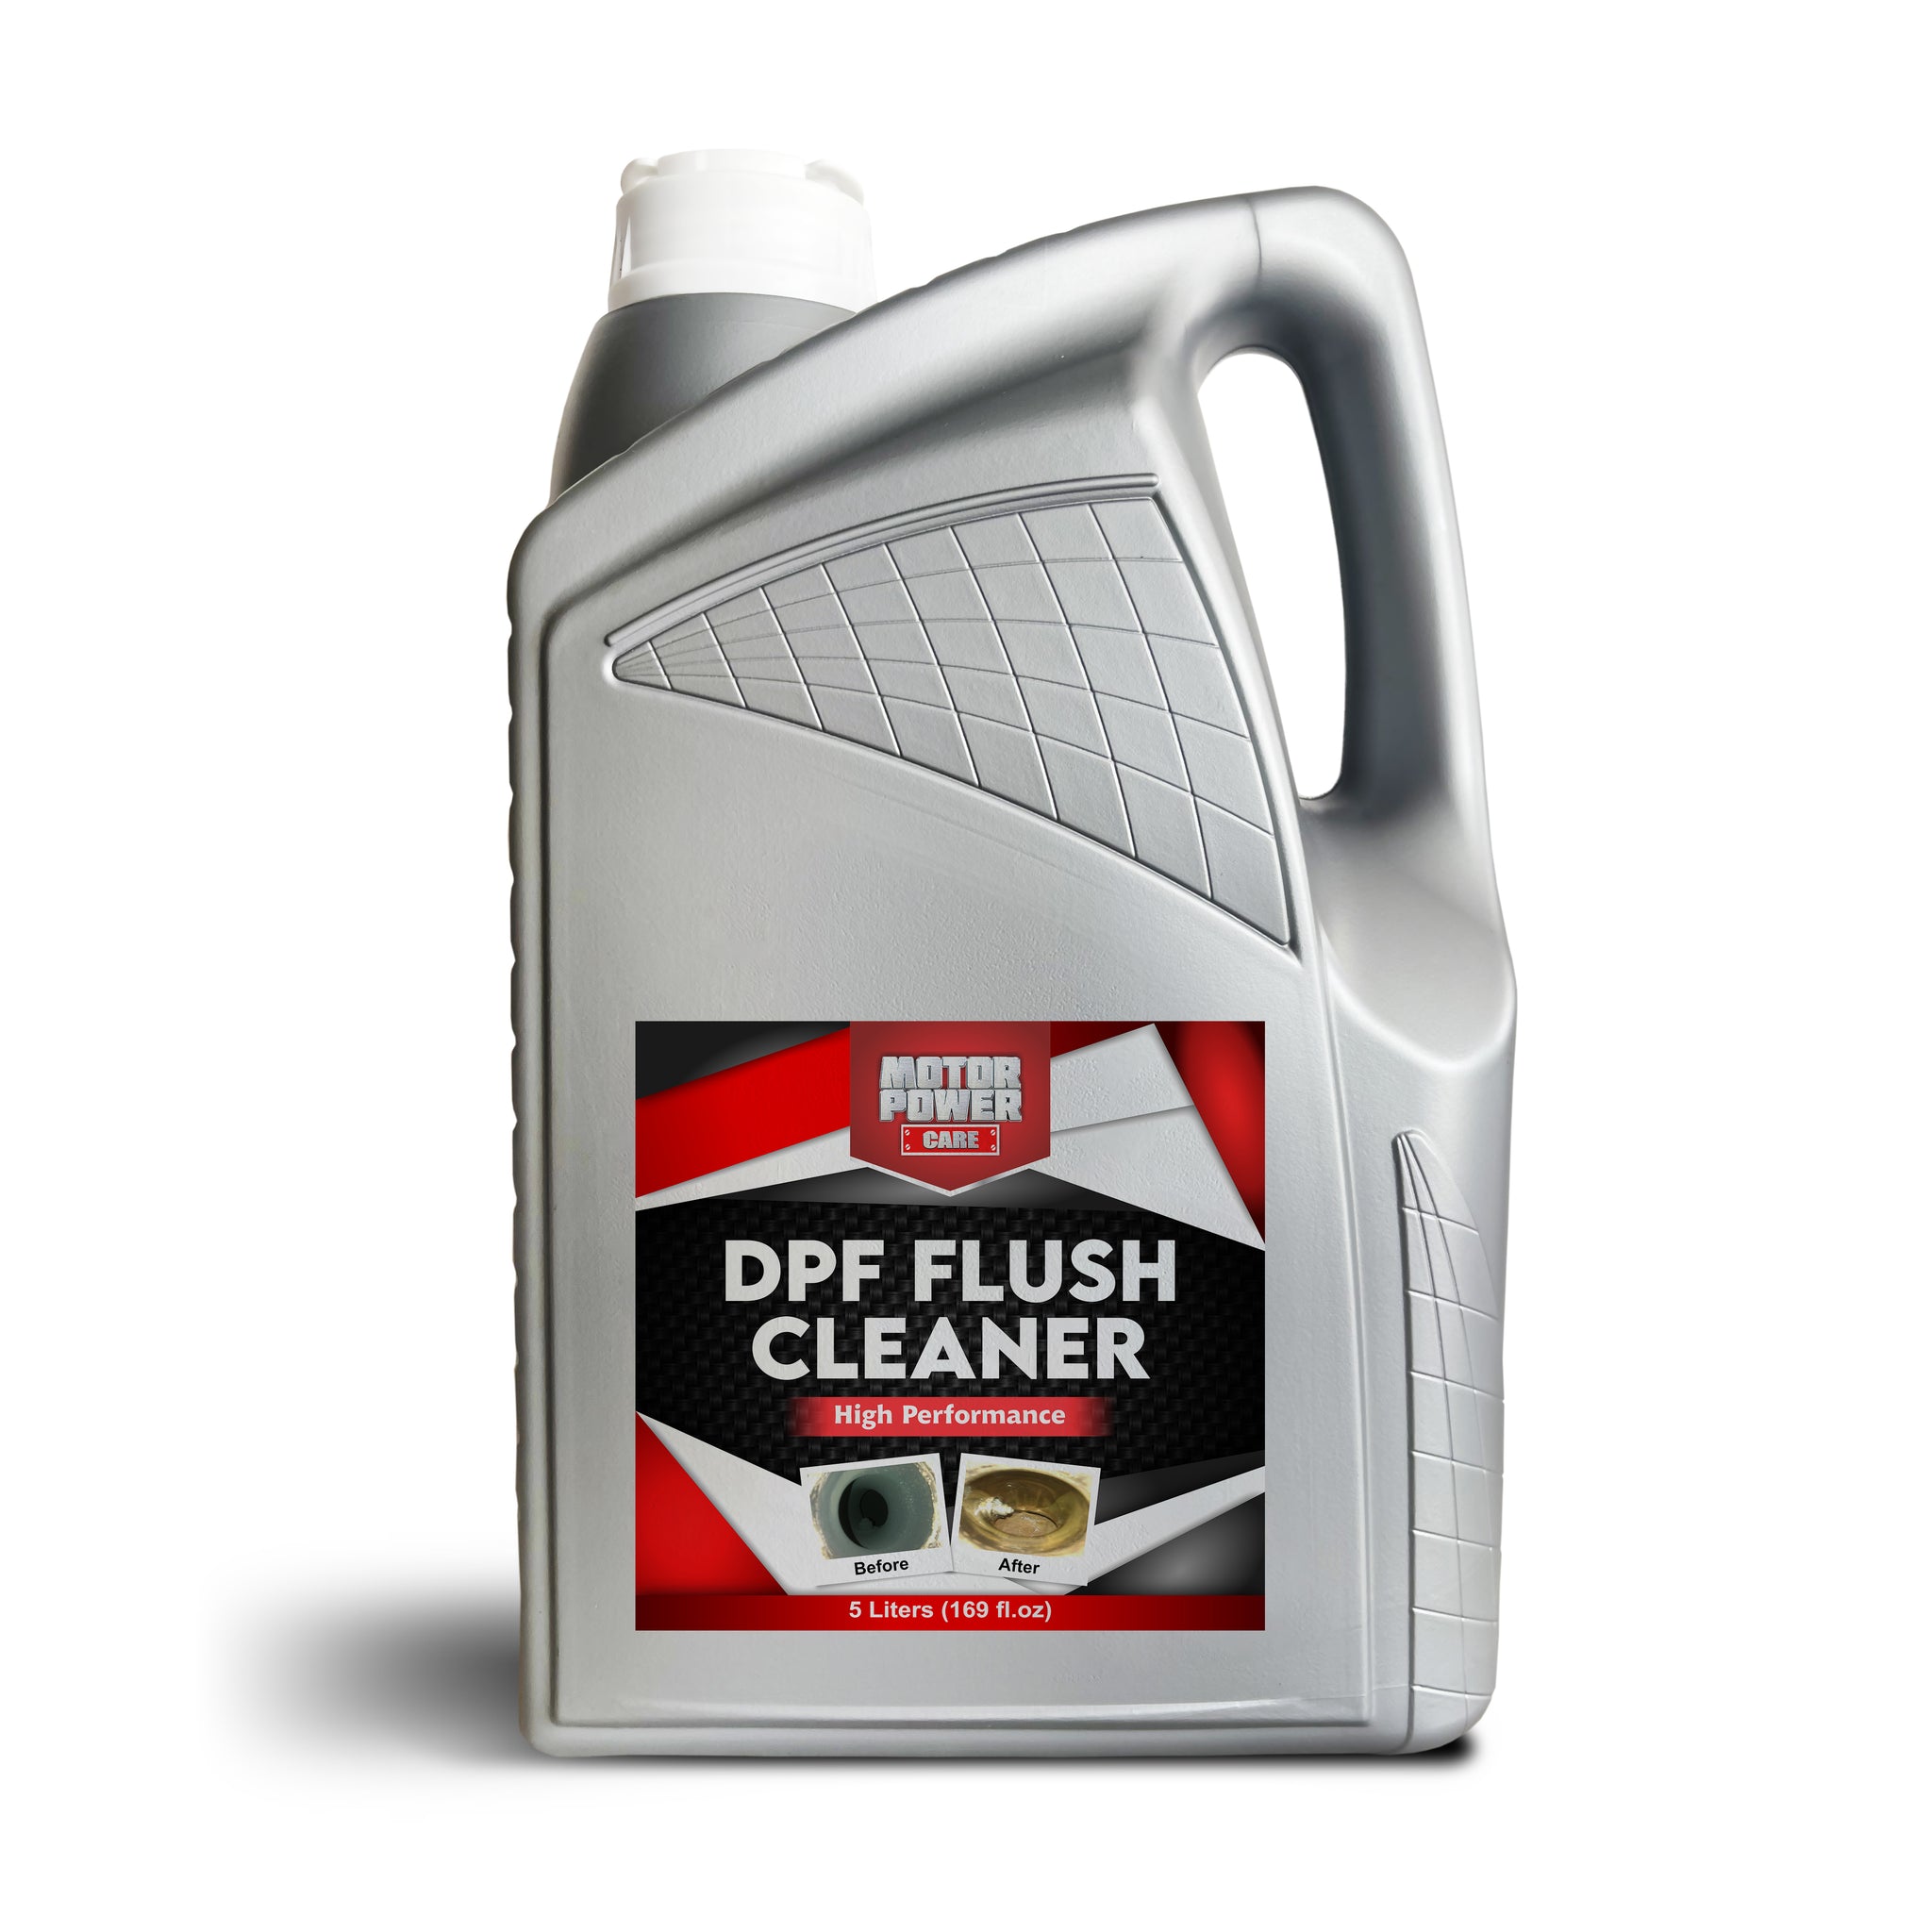 5L DPF cleaner diesel particulate filter DPF flush soot particle filter